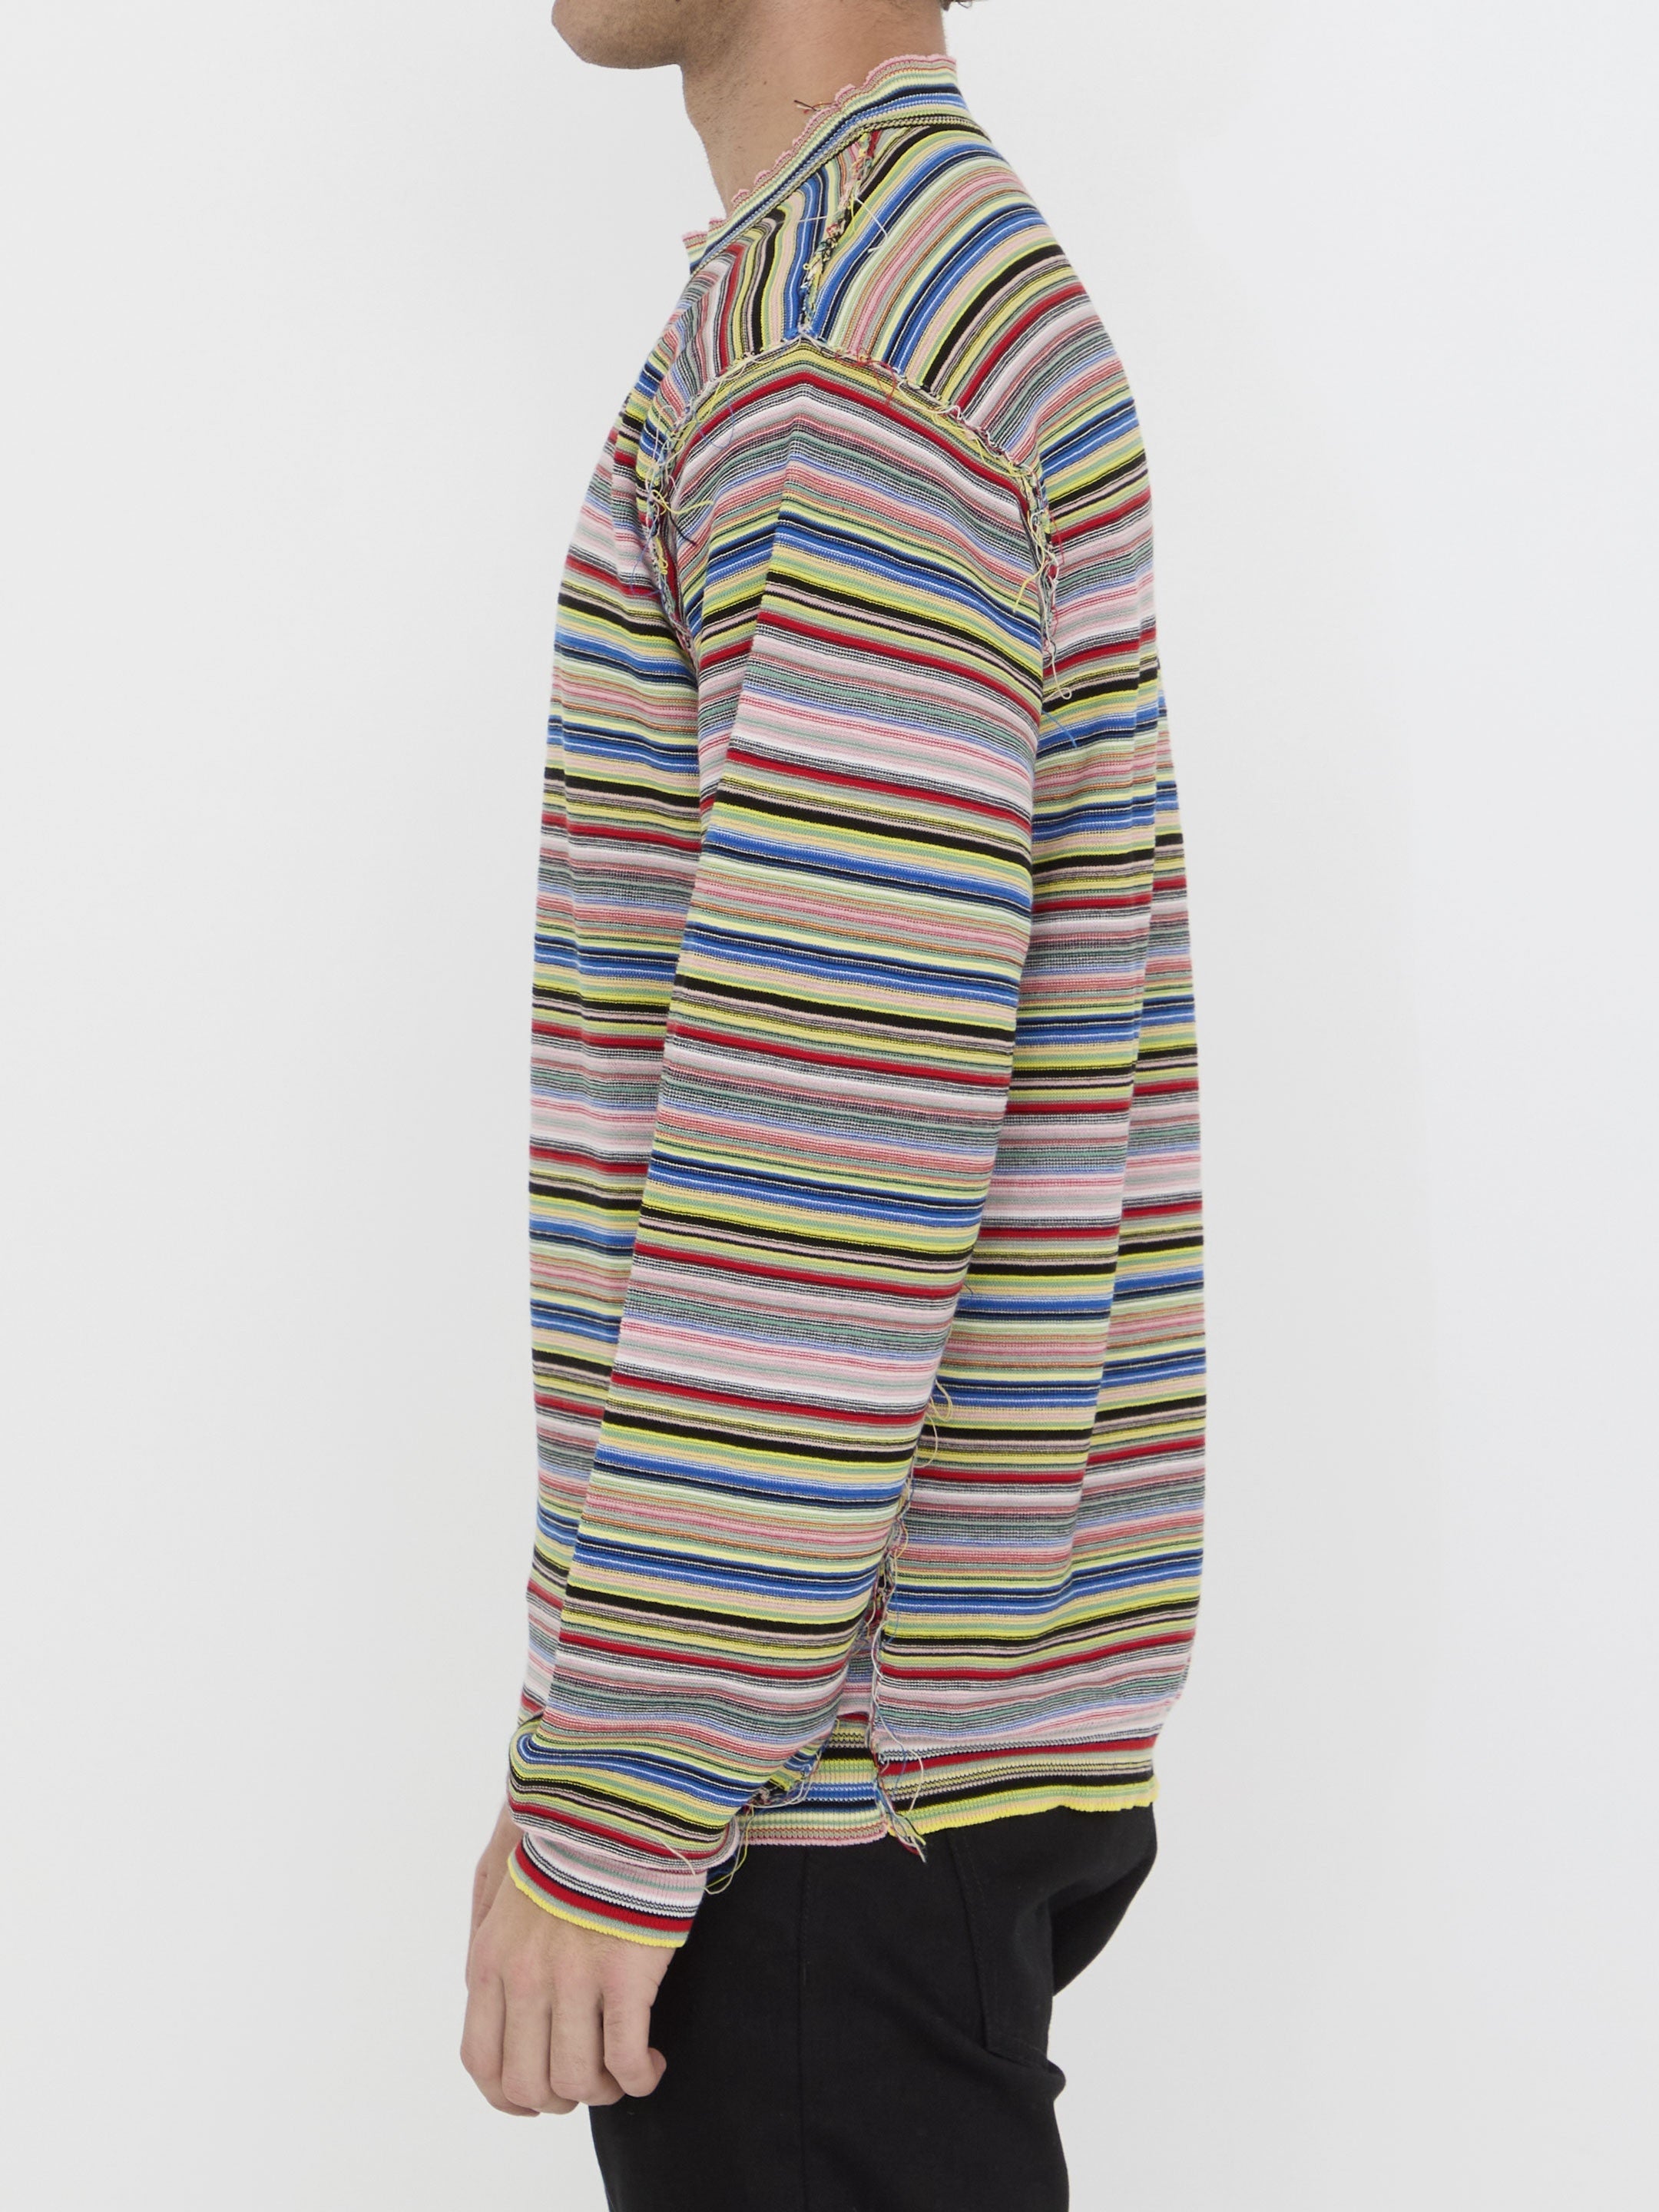 MAISON-MARGIELA-OUTLET-SALE-Striped-top-Shirts-ARCHIVE-COLLECTION-3.jpg